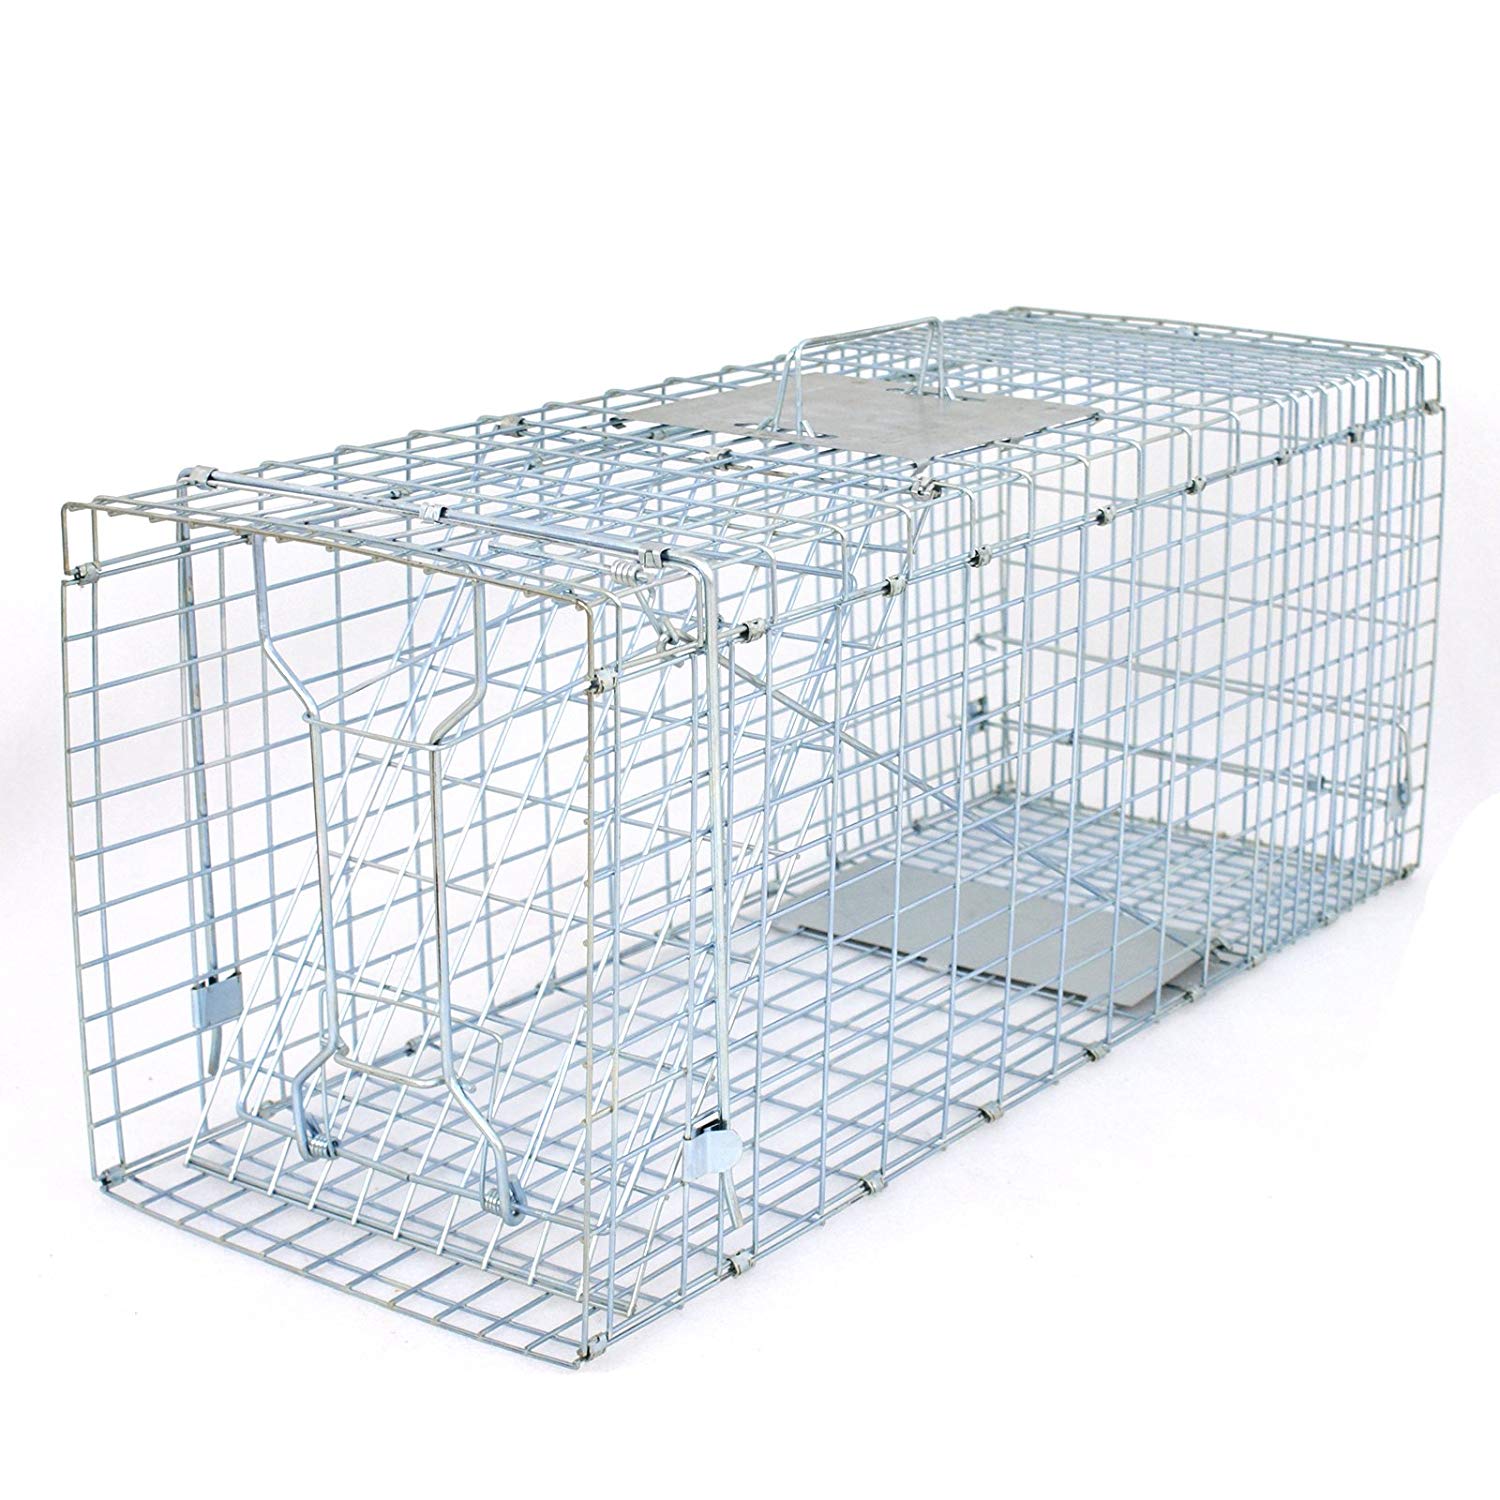 Chipmunk, Squirrel Trap Cages, Rat Trap That Works, Humane Mouse Trap for  Home | Catch and Release | Reusable and Durable | No Kill Animal Trap | for